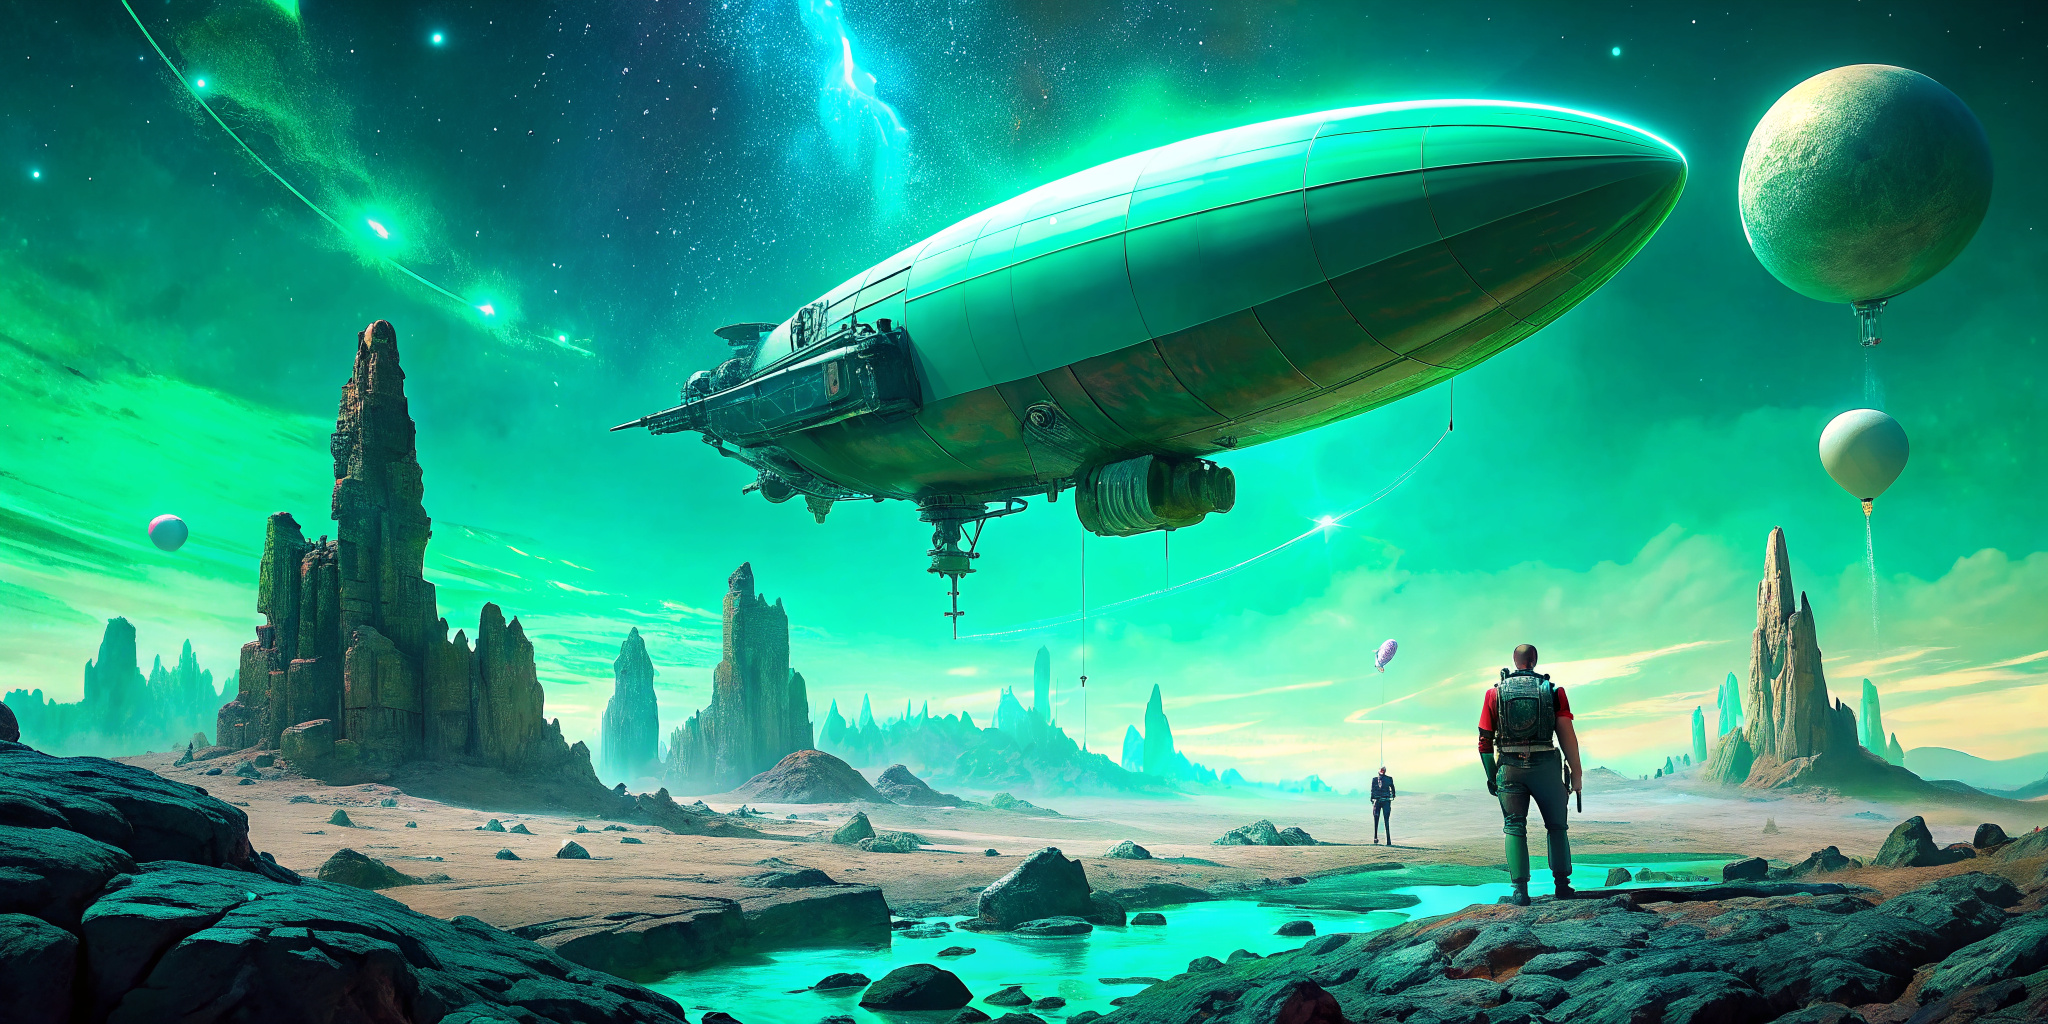 dirigible in alien planet and a astronaut standing on ground, cyberpunck